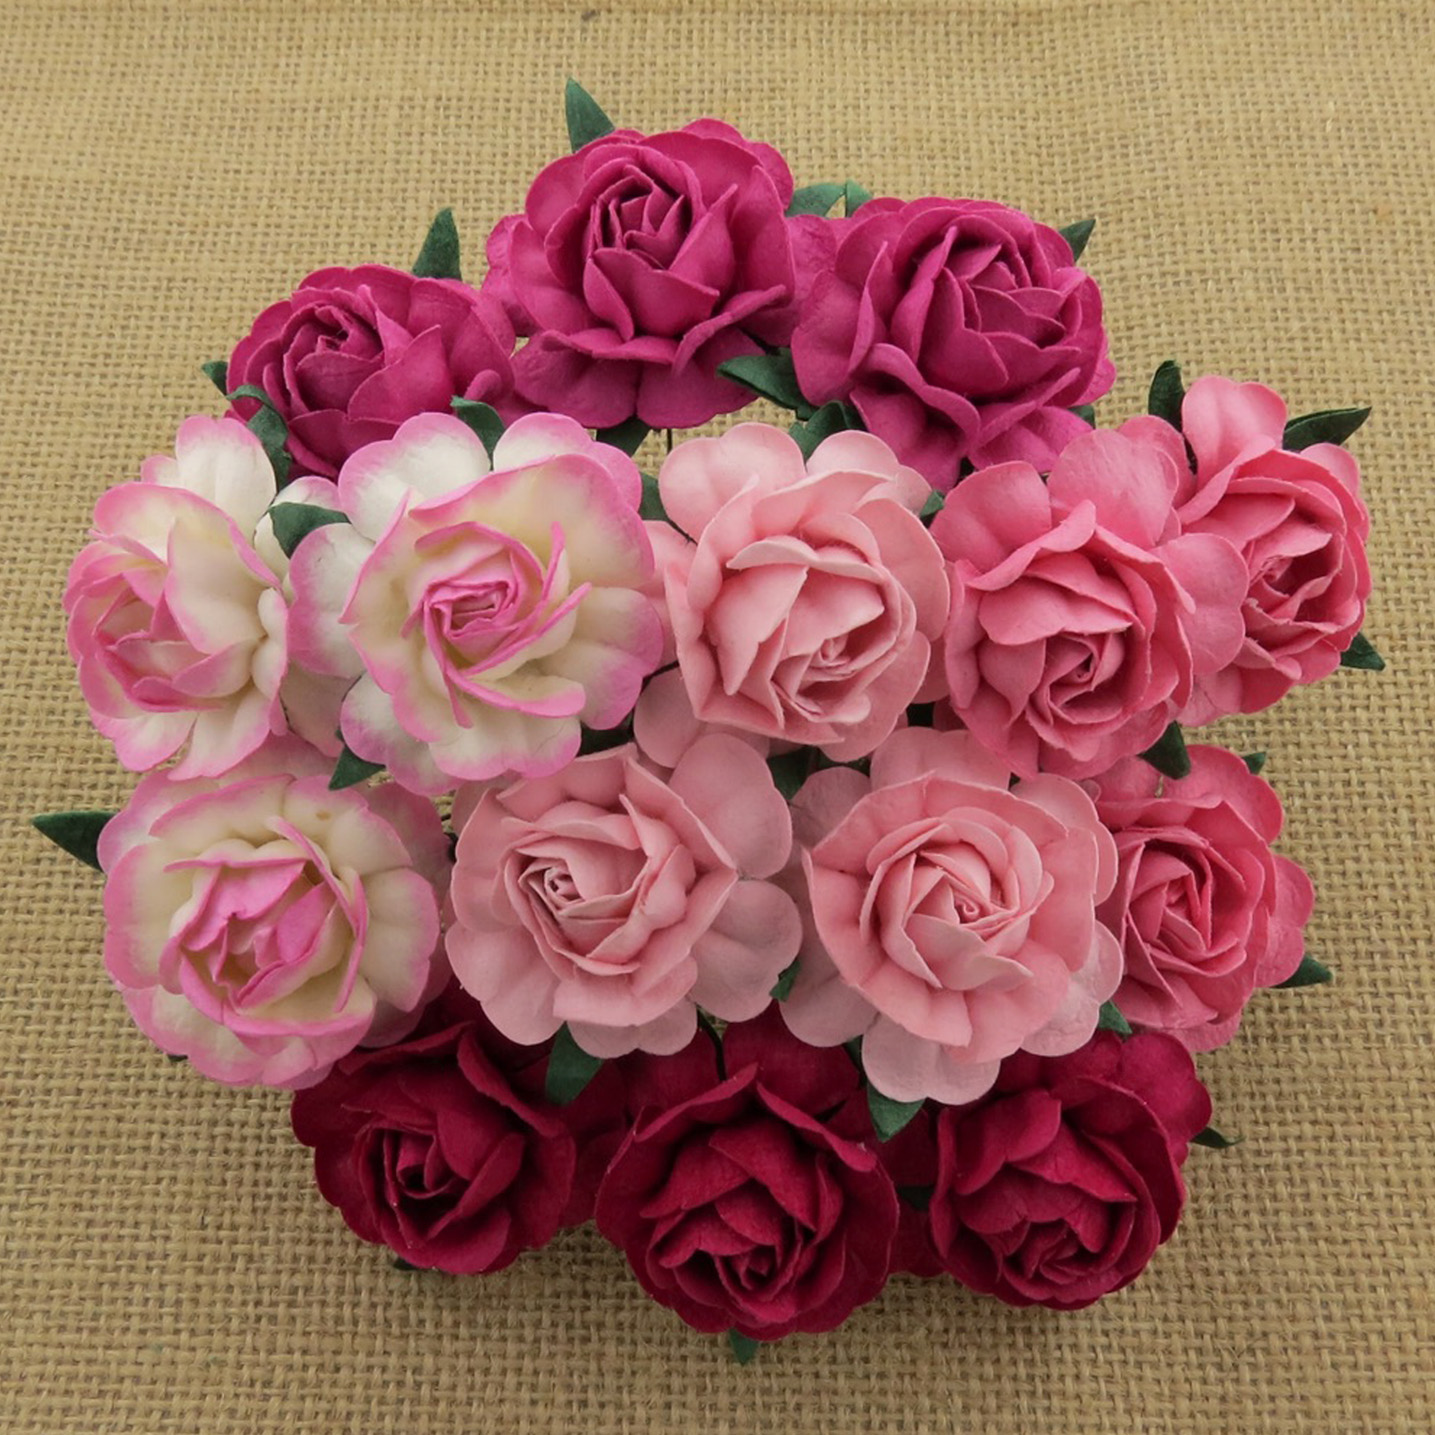 50 MIXED PINK MULBERRY PAPER TEA ROSES 40mm - 5 COLOR